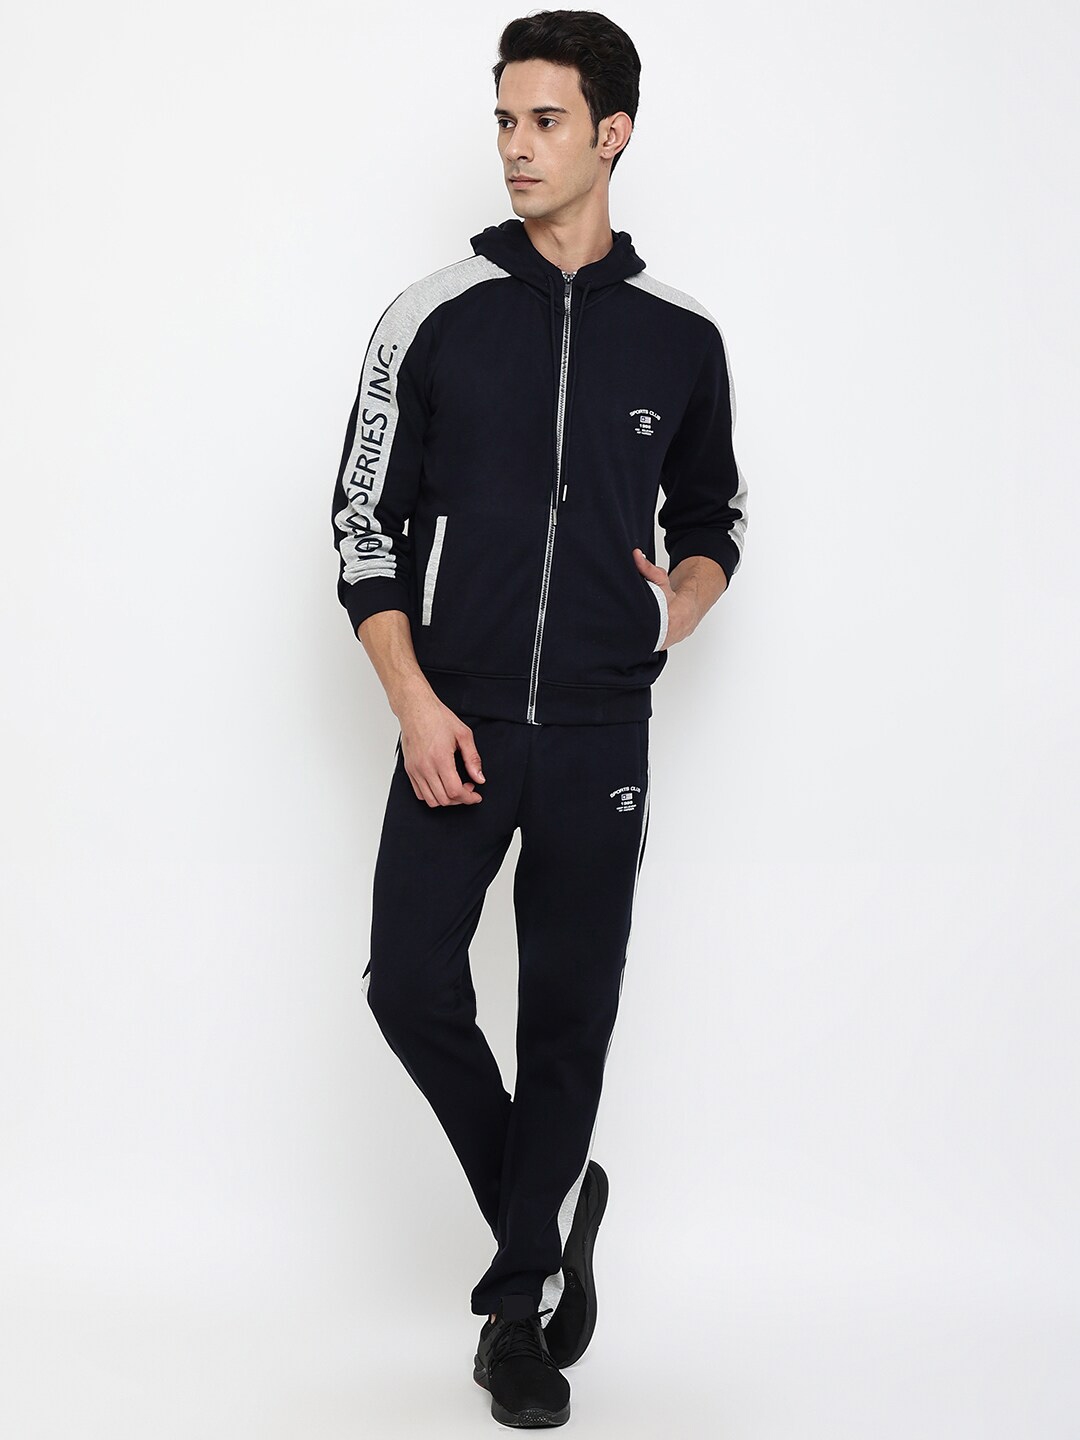 Buy Cantabil Men Navy Blue & White Colorblocked Acrylic Tracksuits ...